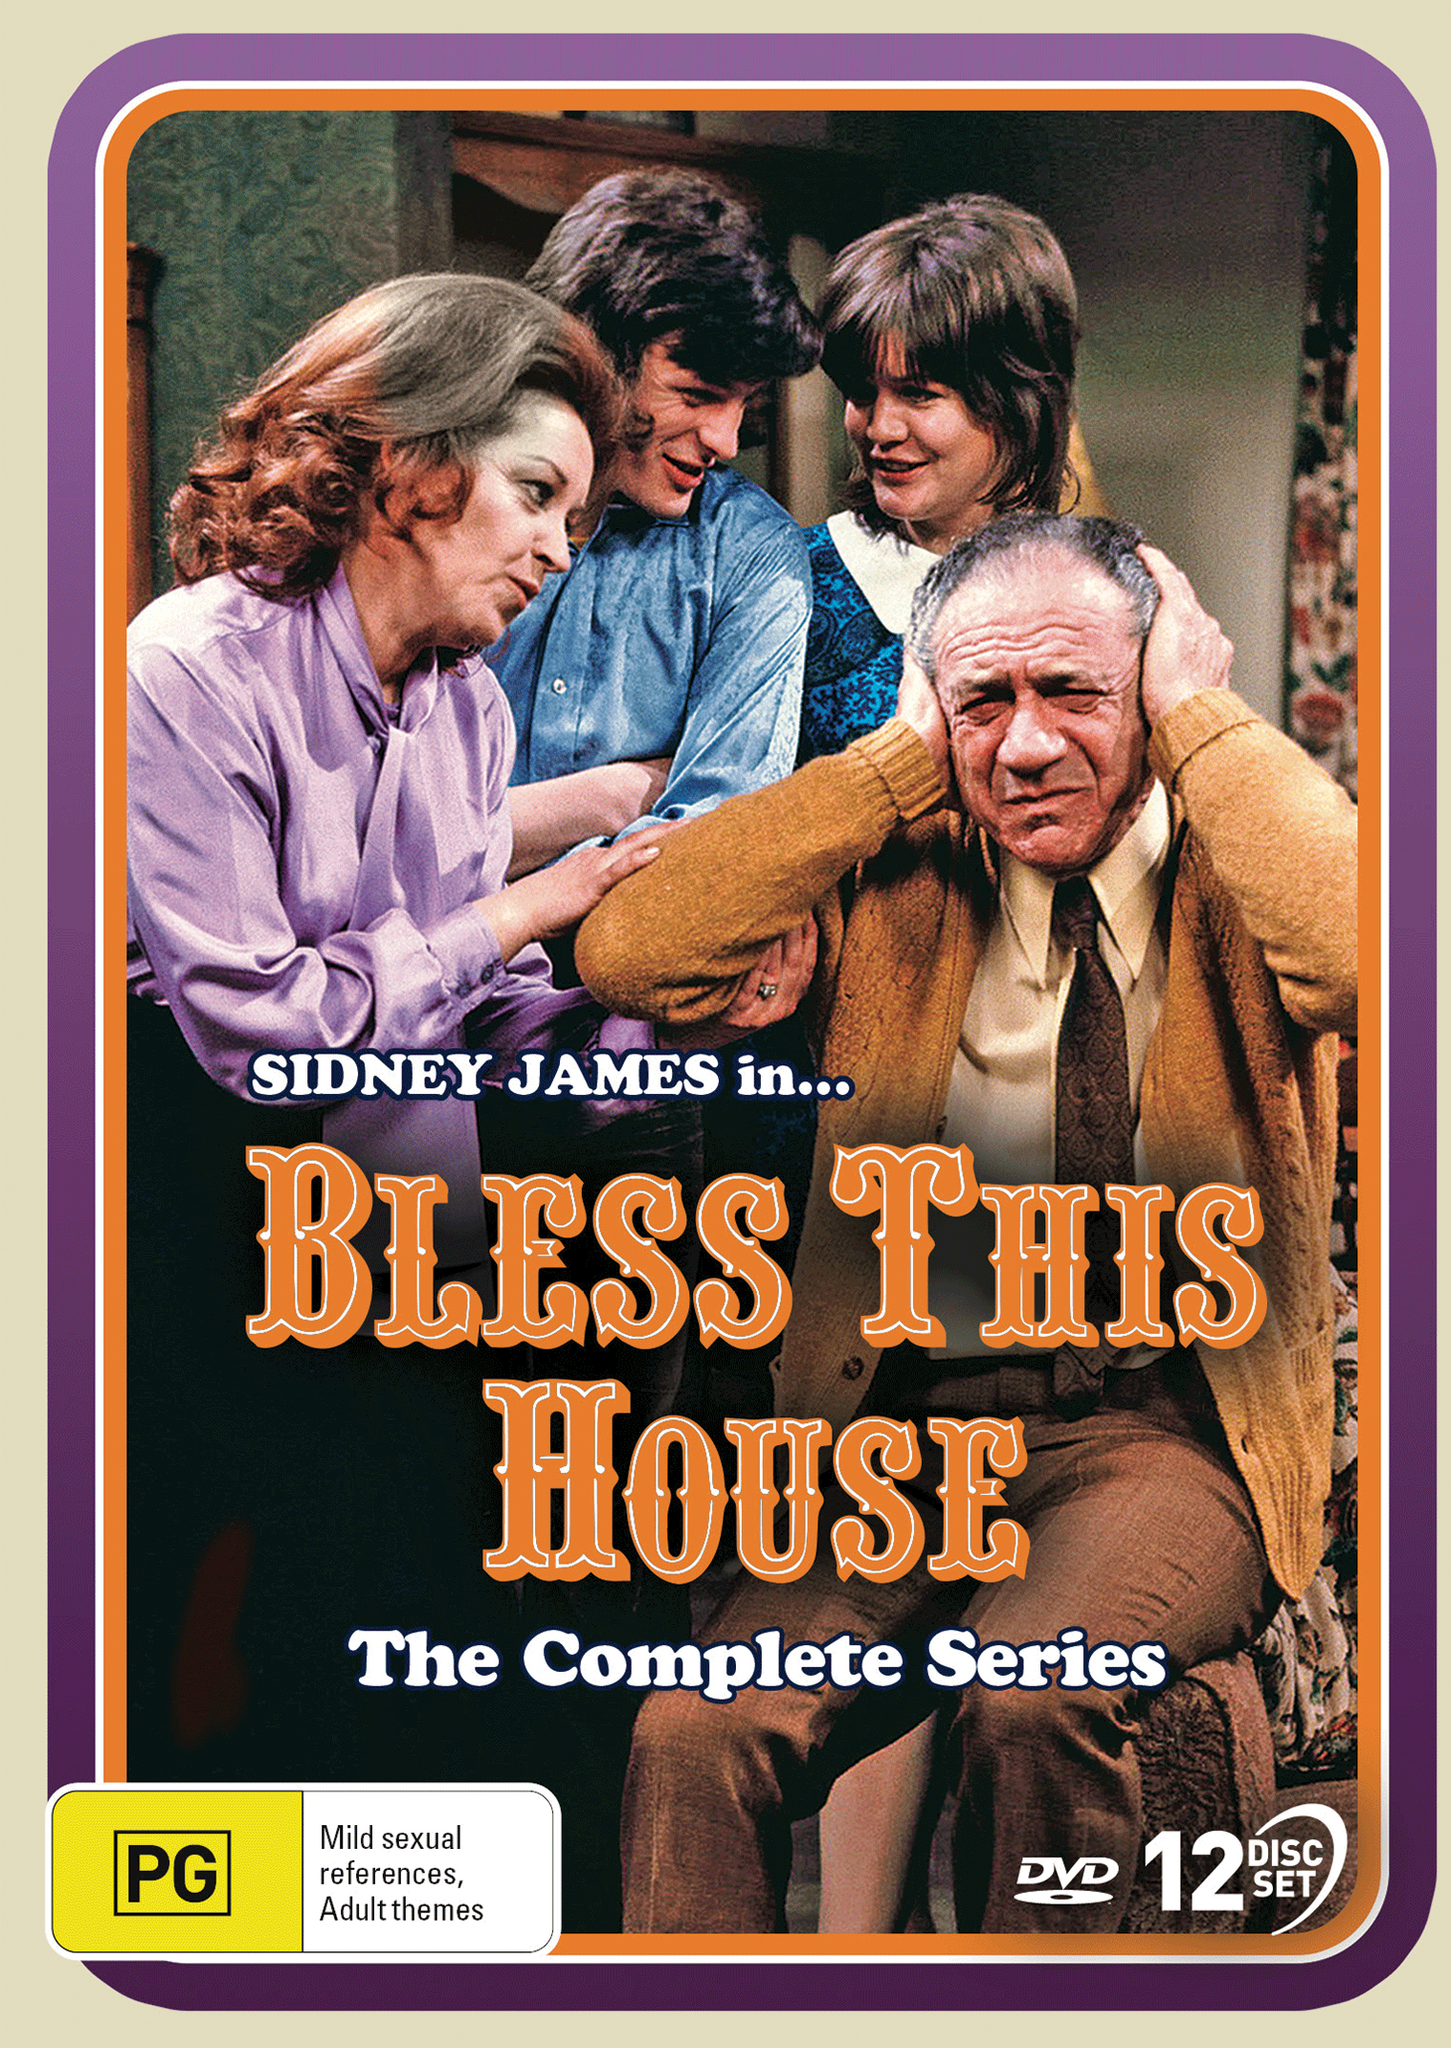 BLESS THIS HOUSE: THE COMPLETE SERIES (RE-ISSUE)